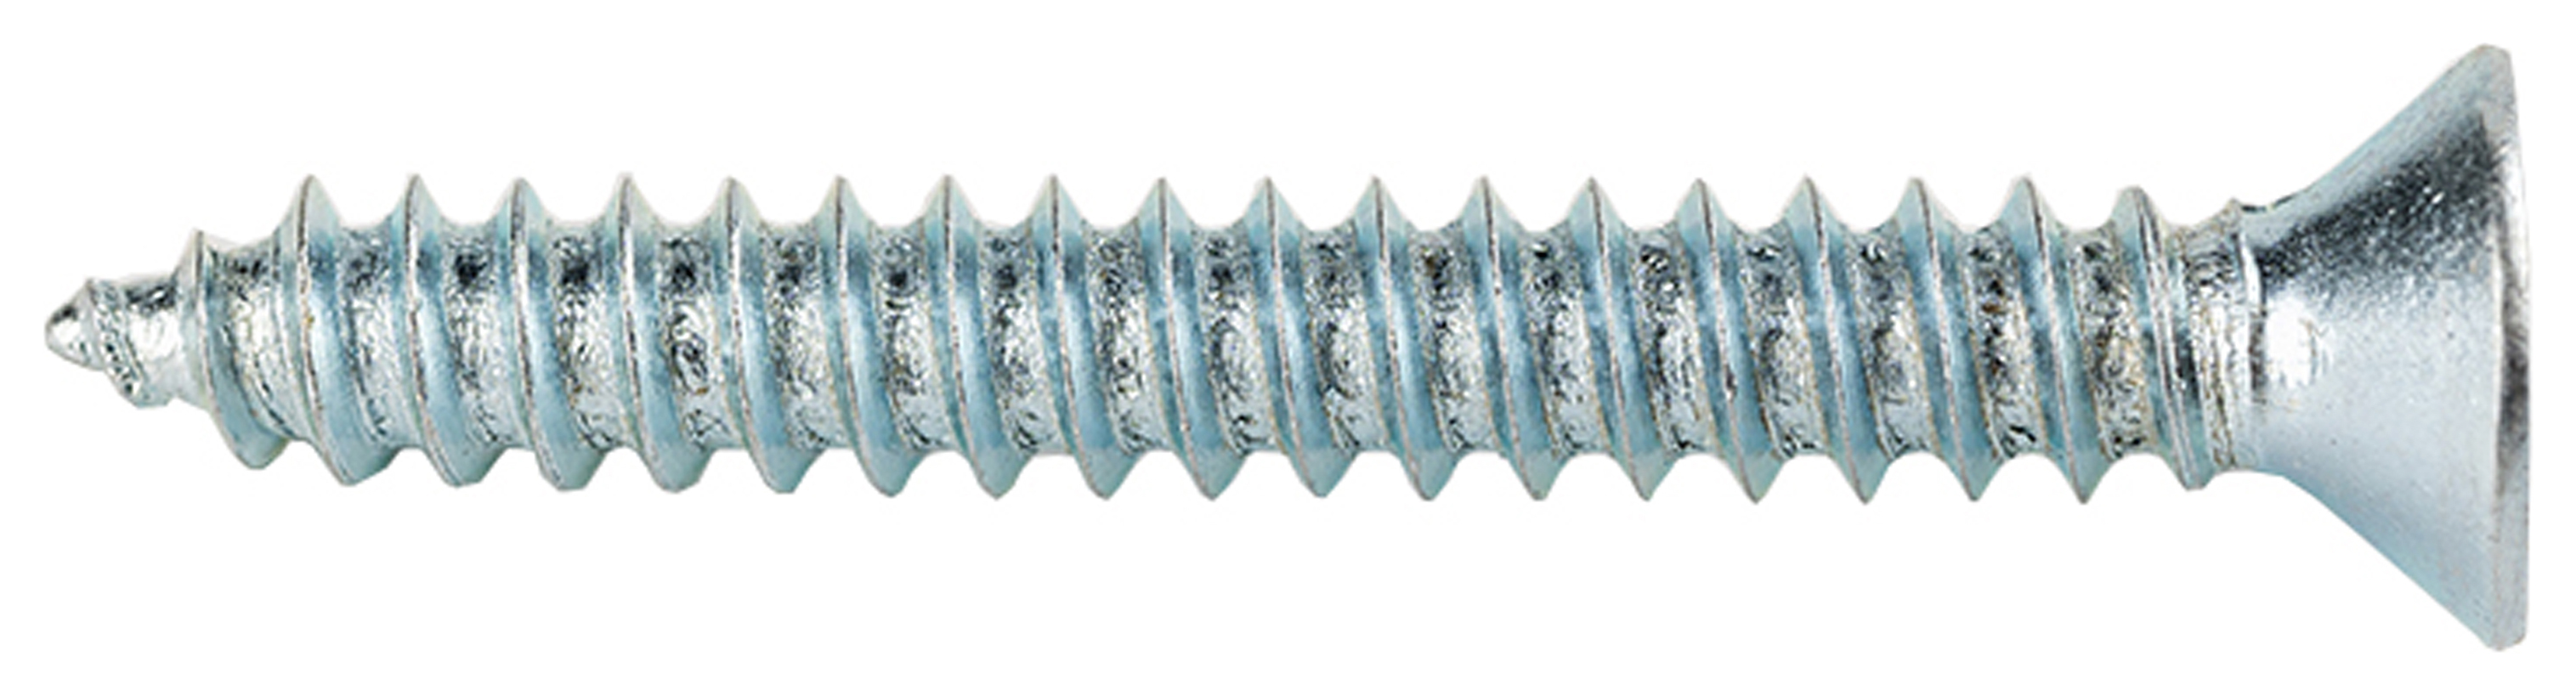 Wickes Self Tapping Countersunk Head Screws - 5 x 40mm - Pack of 100